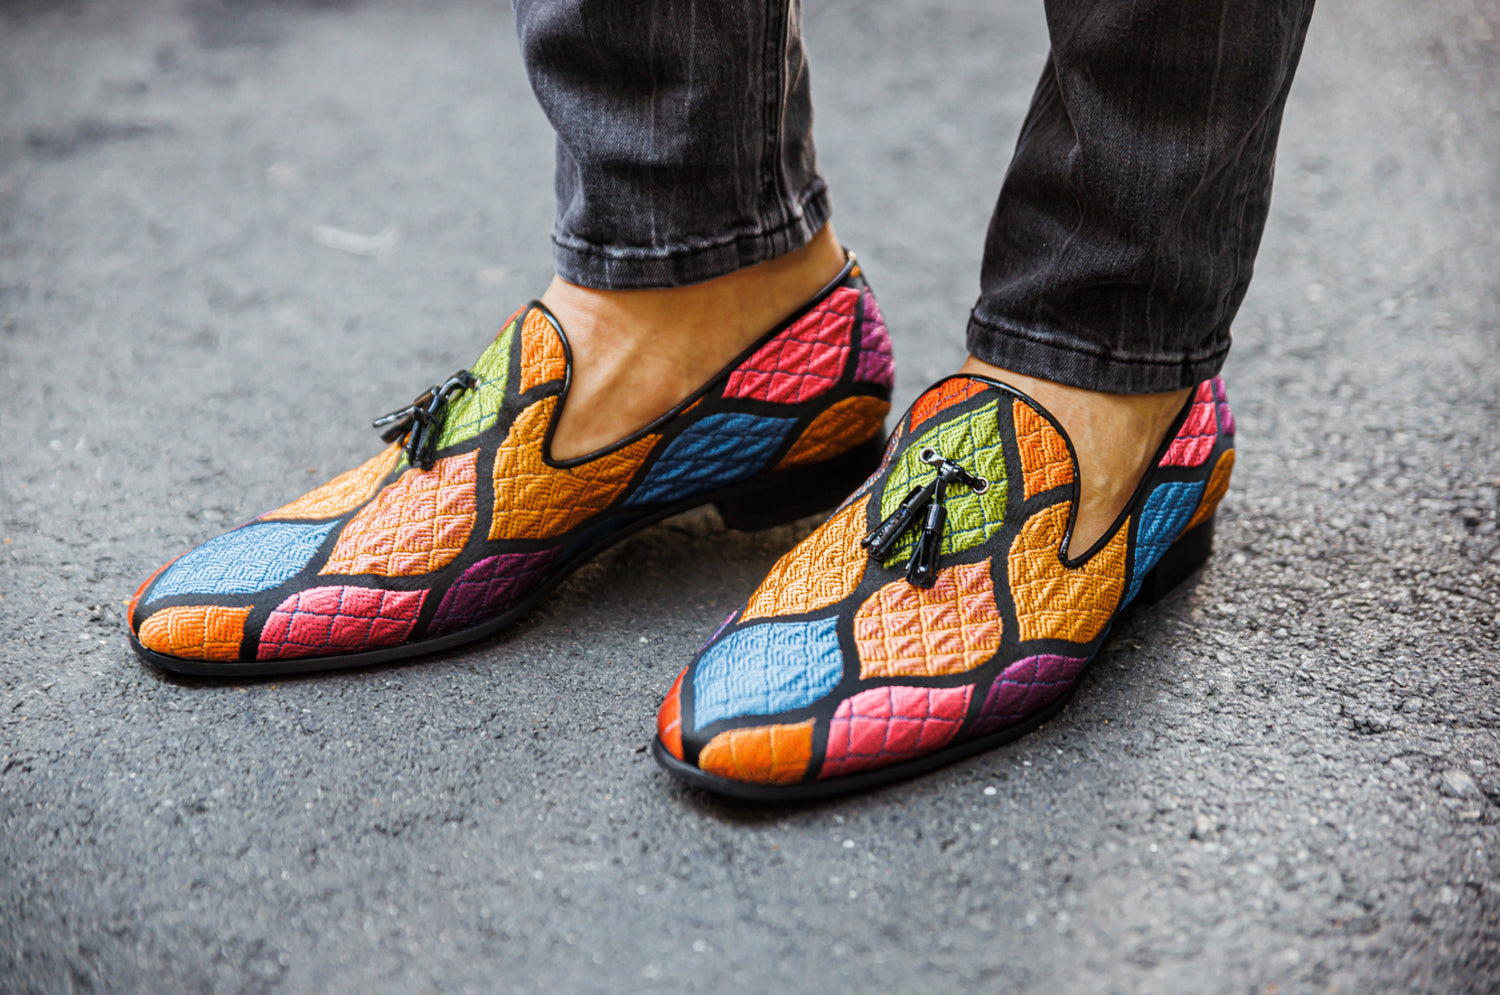 The Dominica Loafers - Loafers by Urbbana